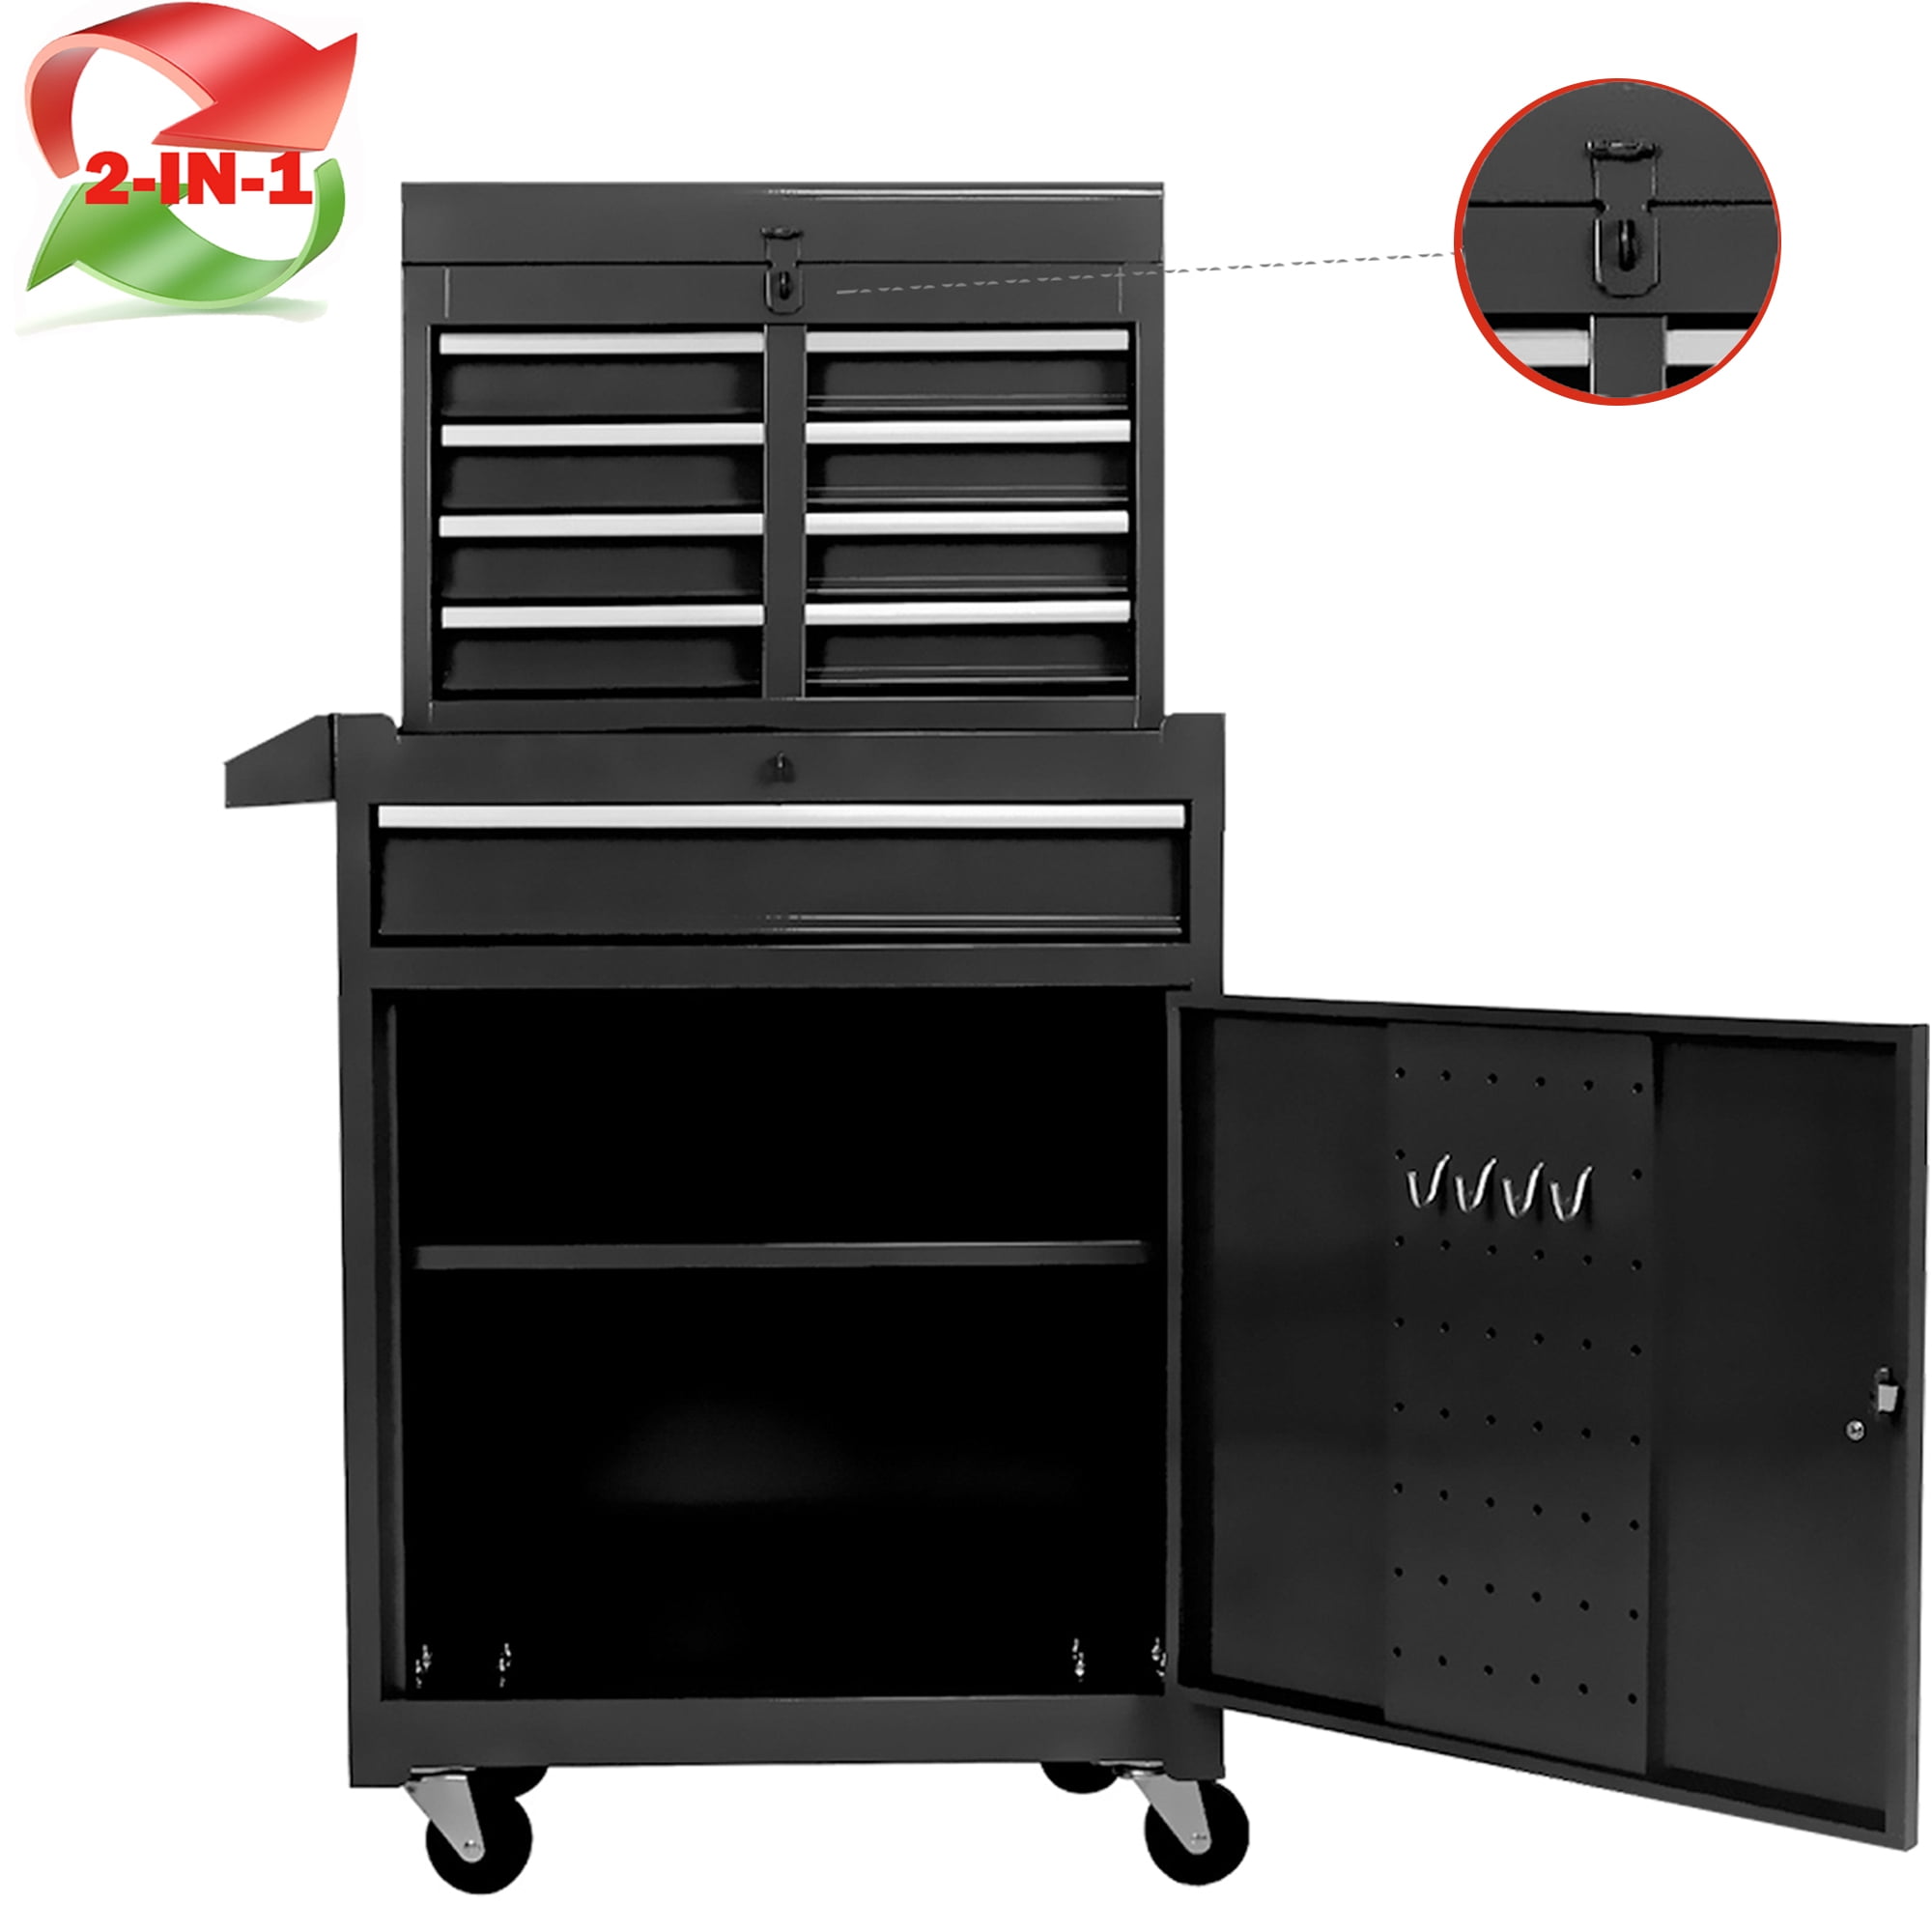 module autobiografie been Tool Chest with Drawers, 2-IN-1 Rolling Tool Box & Cabinet Large Capacity  with 5 Drawers, Lockable Tool Box Organizer On Wheels with Sliding Drawers,  Hidden Double Tool Box, Black - Walmart.com